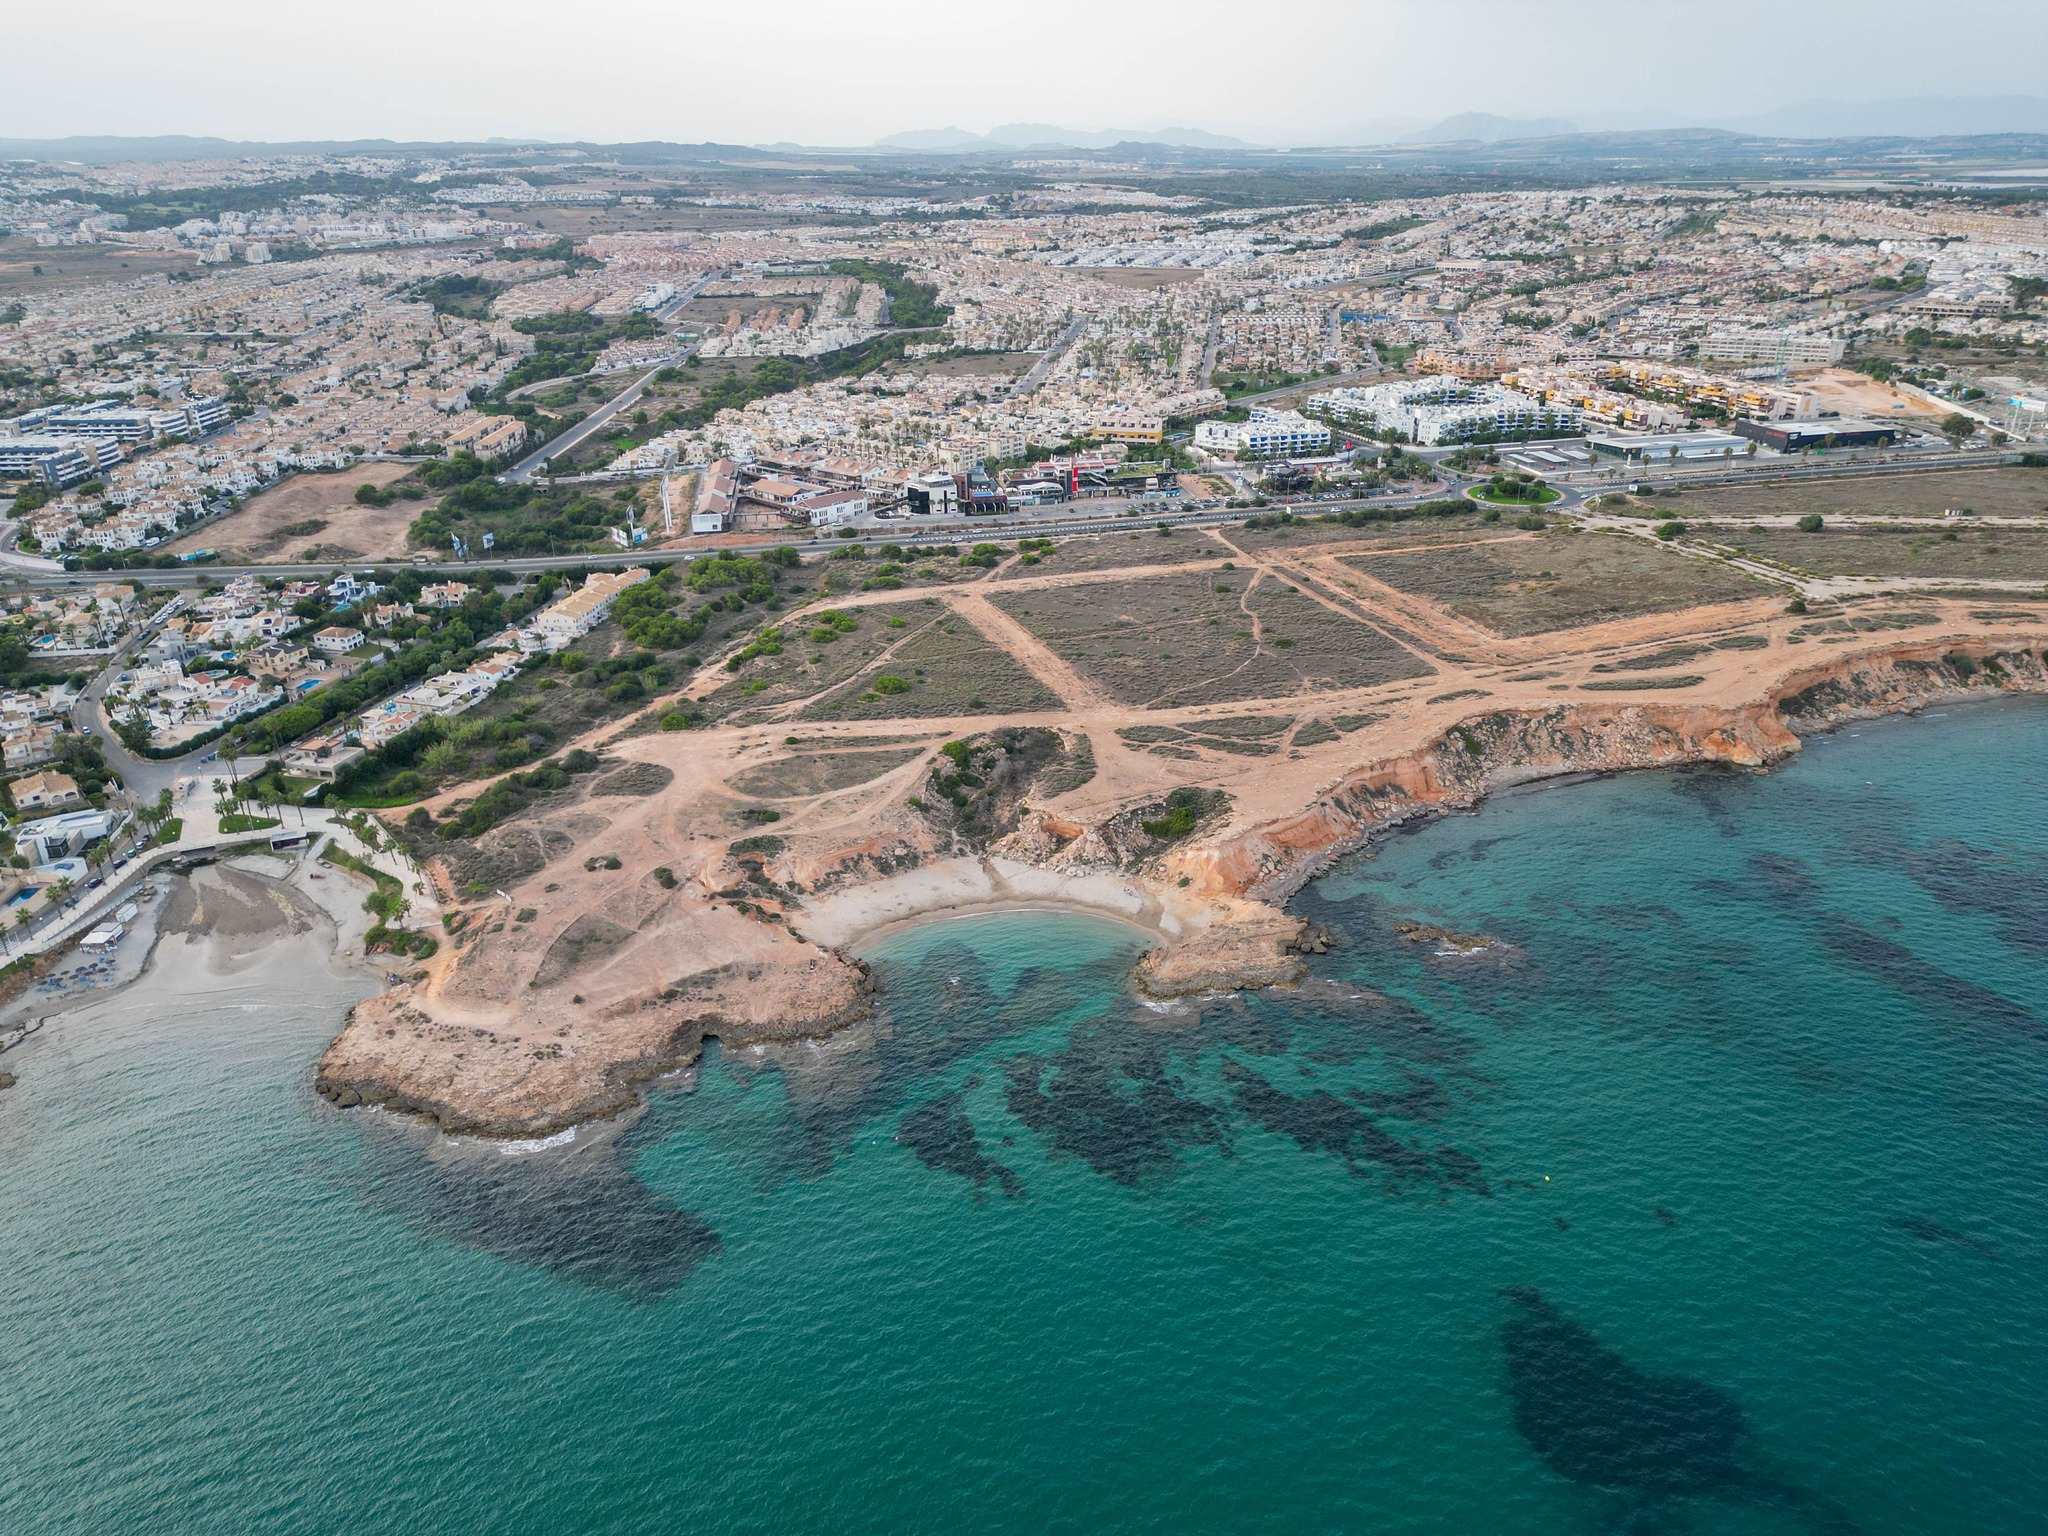 Official go-ahead within days for controversial urbanisation on unspoilt stretch of Spain's Costa Blanca